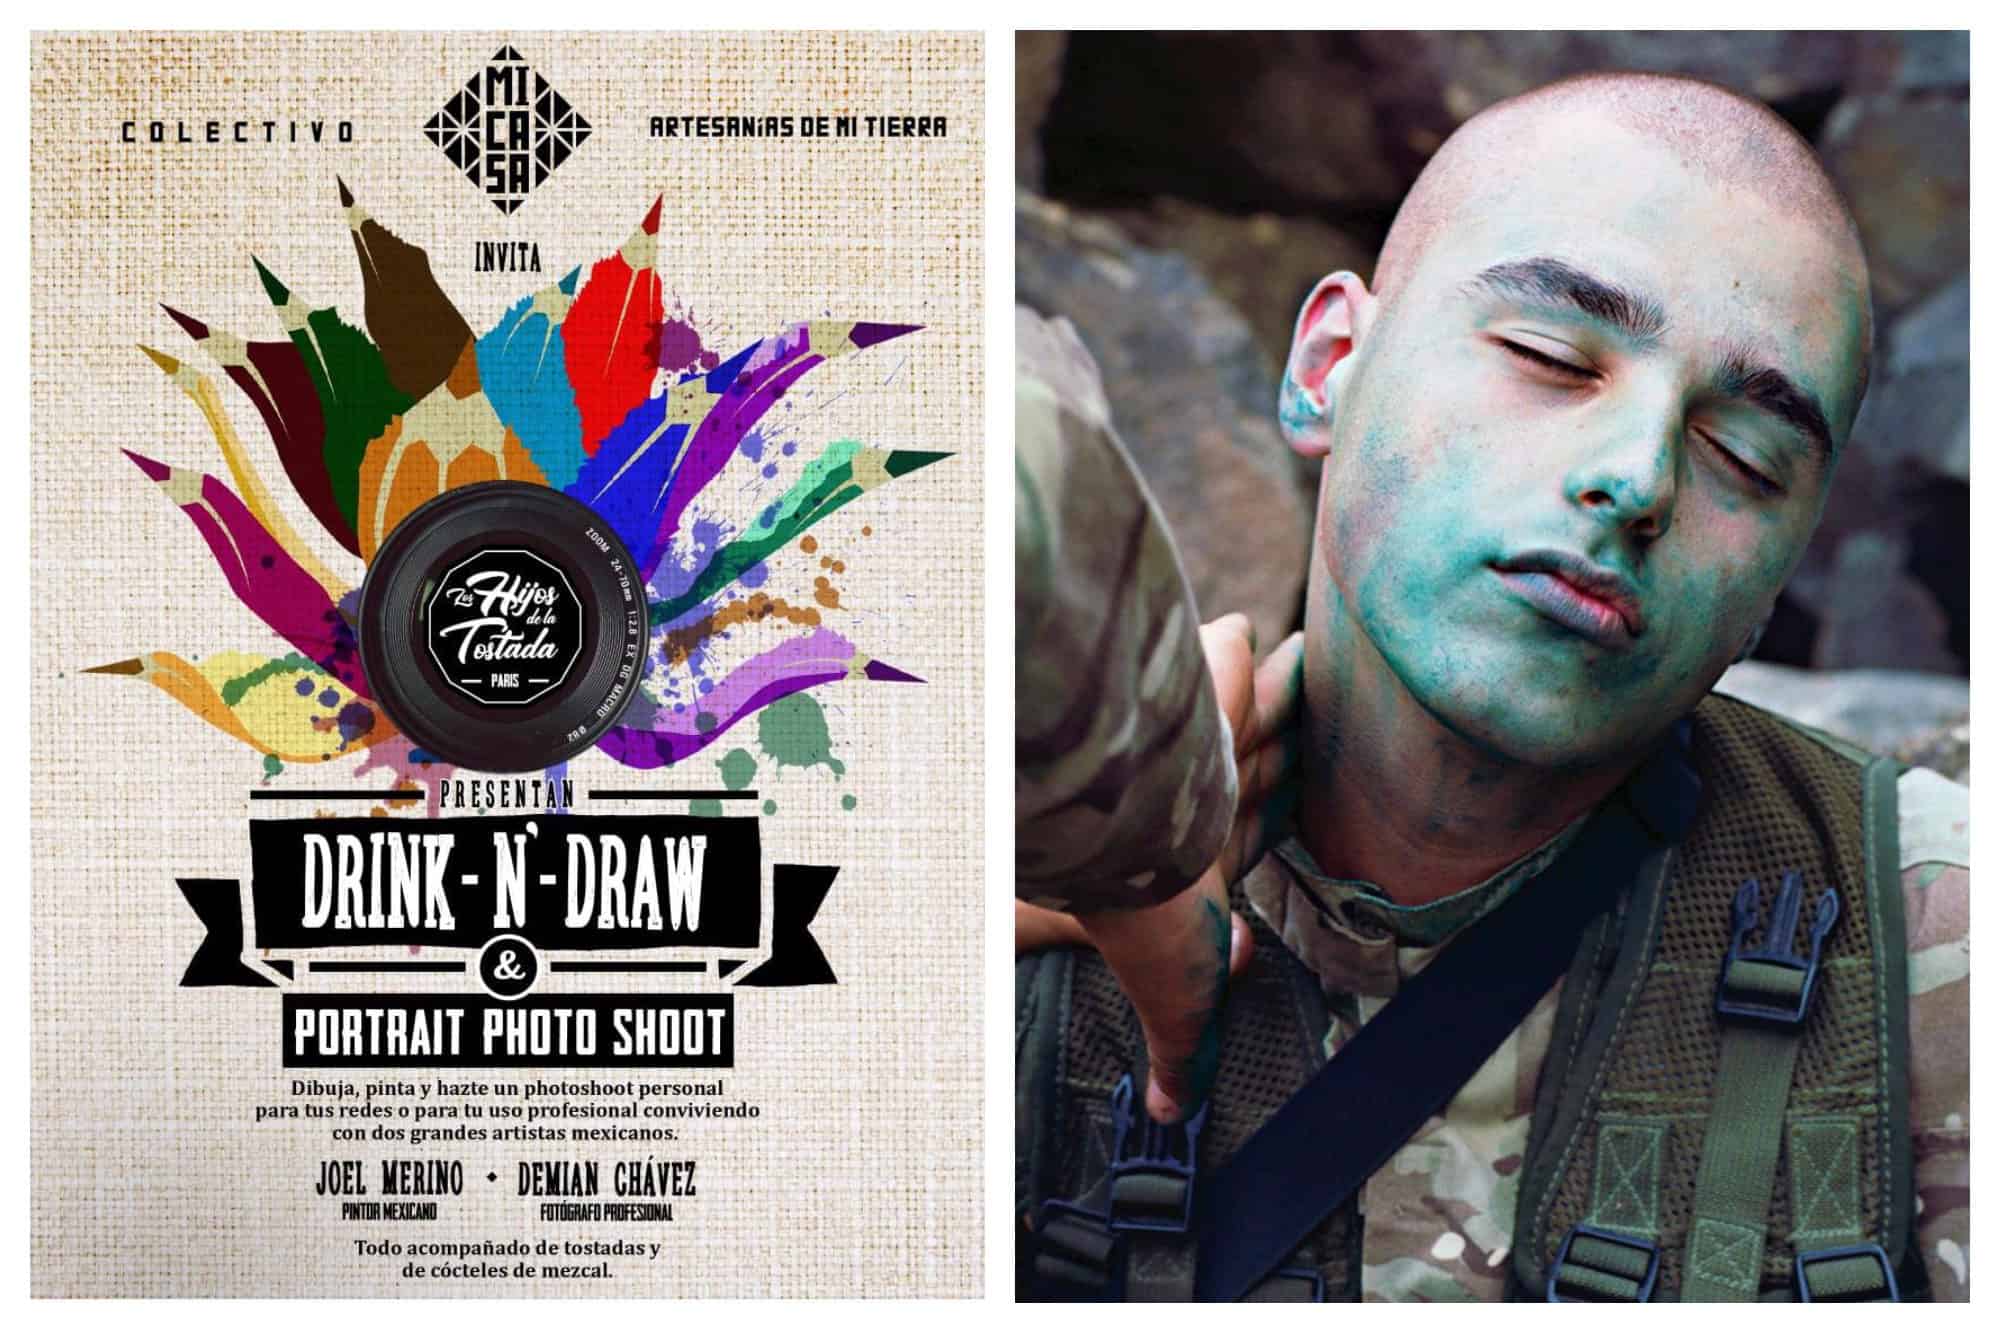 A poster for Drink'n'Draw photography event in Paris  (left) and a photograh of a young man in an army uniform his face covered in green paint (right).